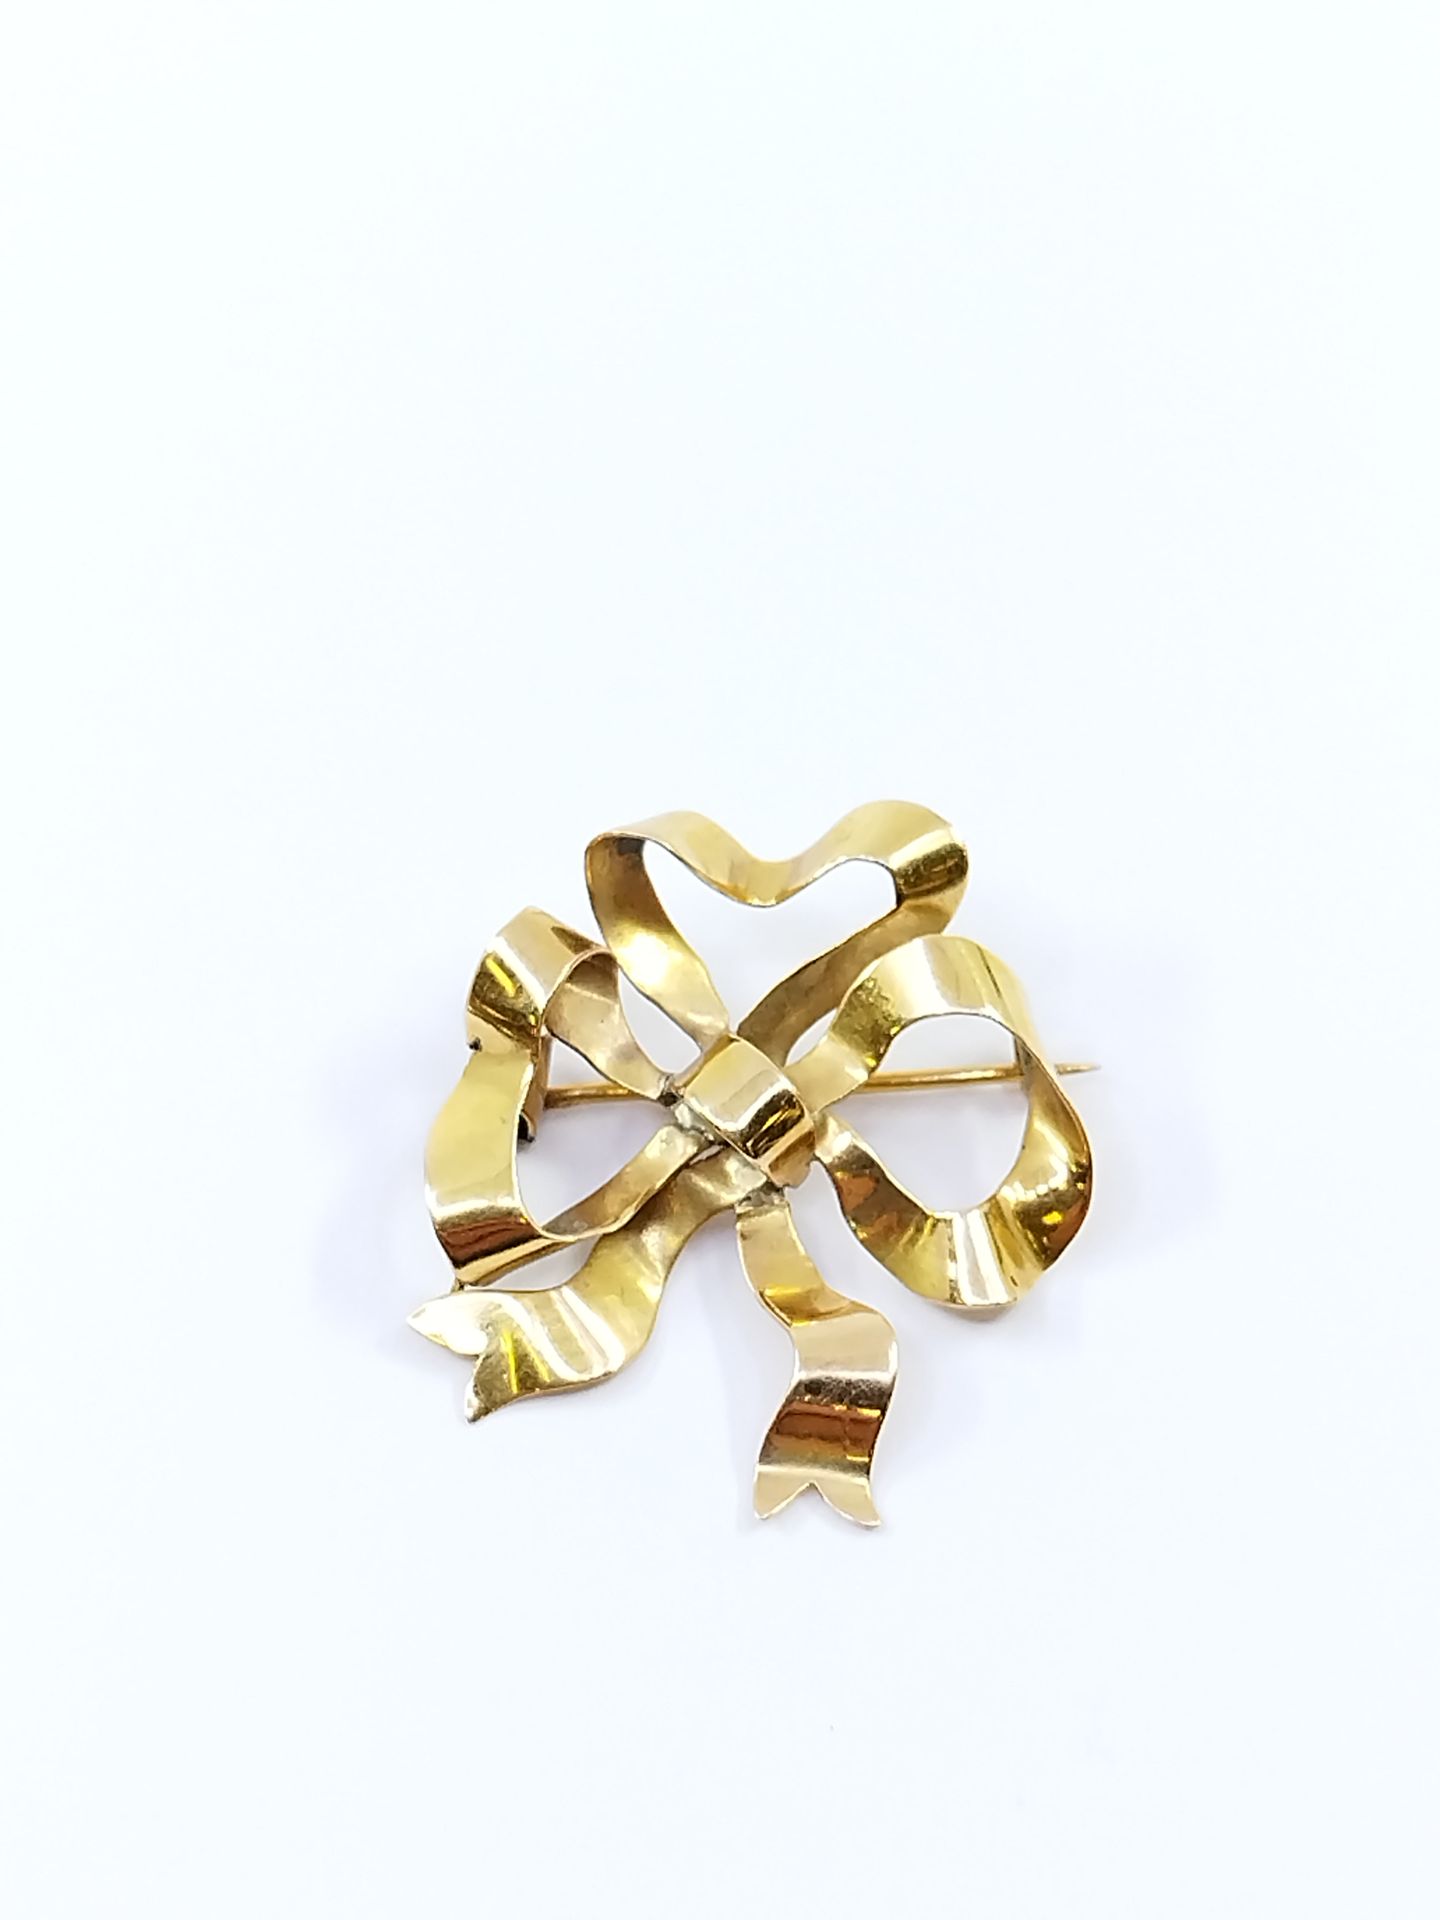 Null FRENCH WORK

Yellow gold 750° pin representing a knot à la Sevigné 

French&hellip;